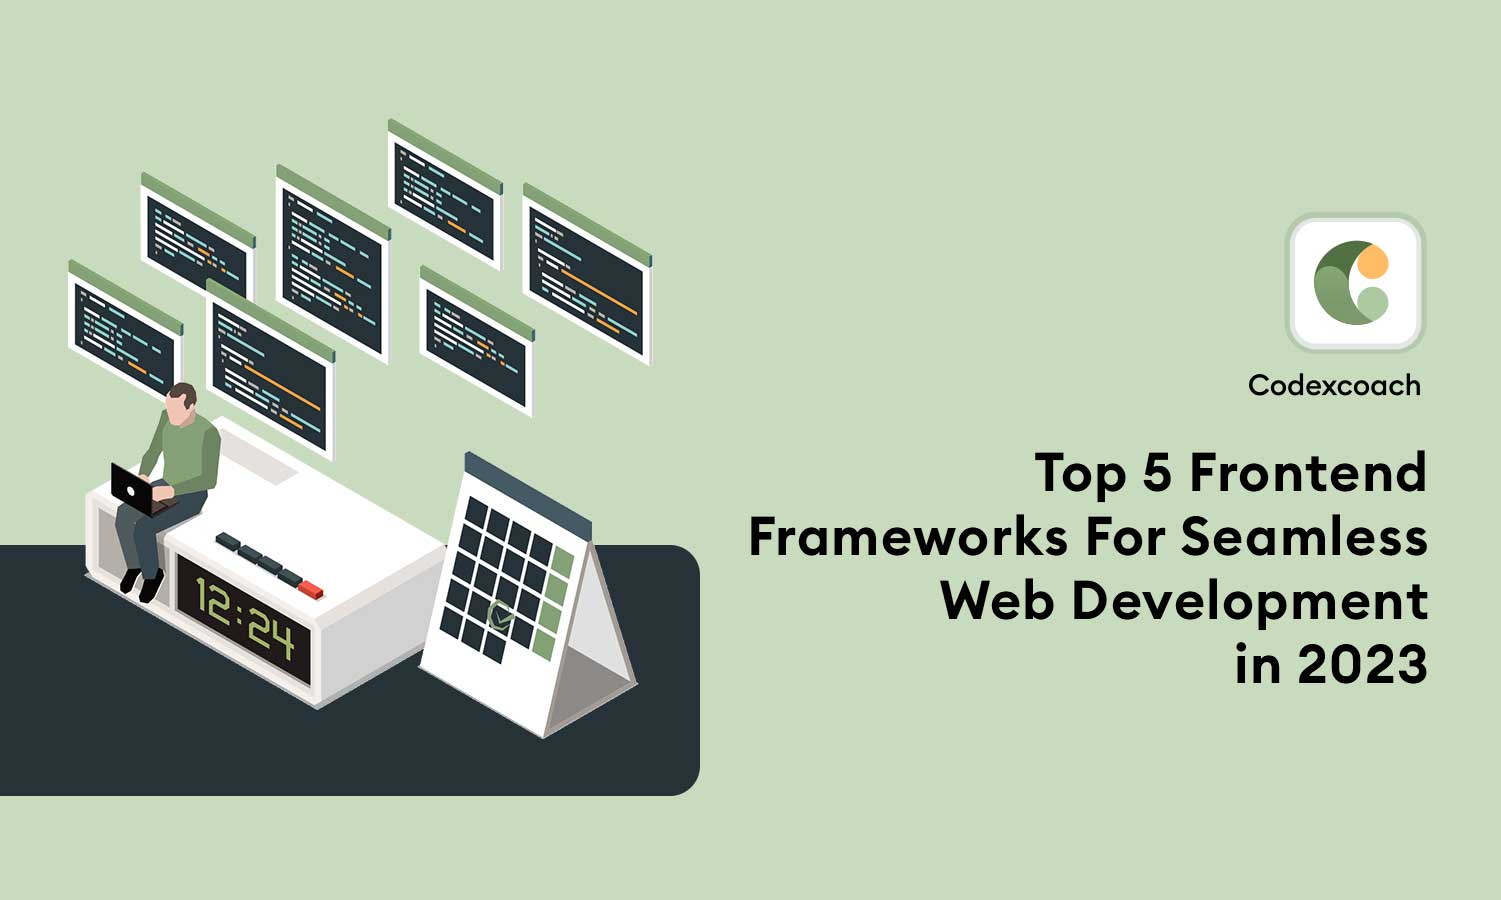 Top 5 Frontend Frameworks for Seamless Web Development in 2023